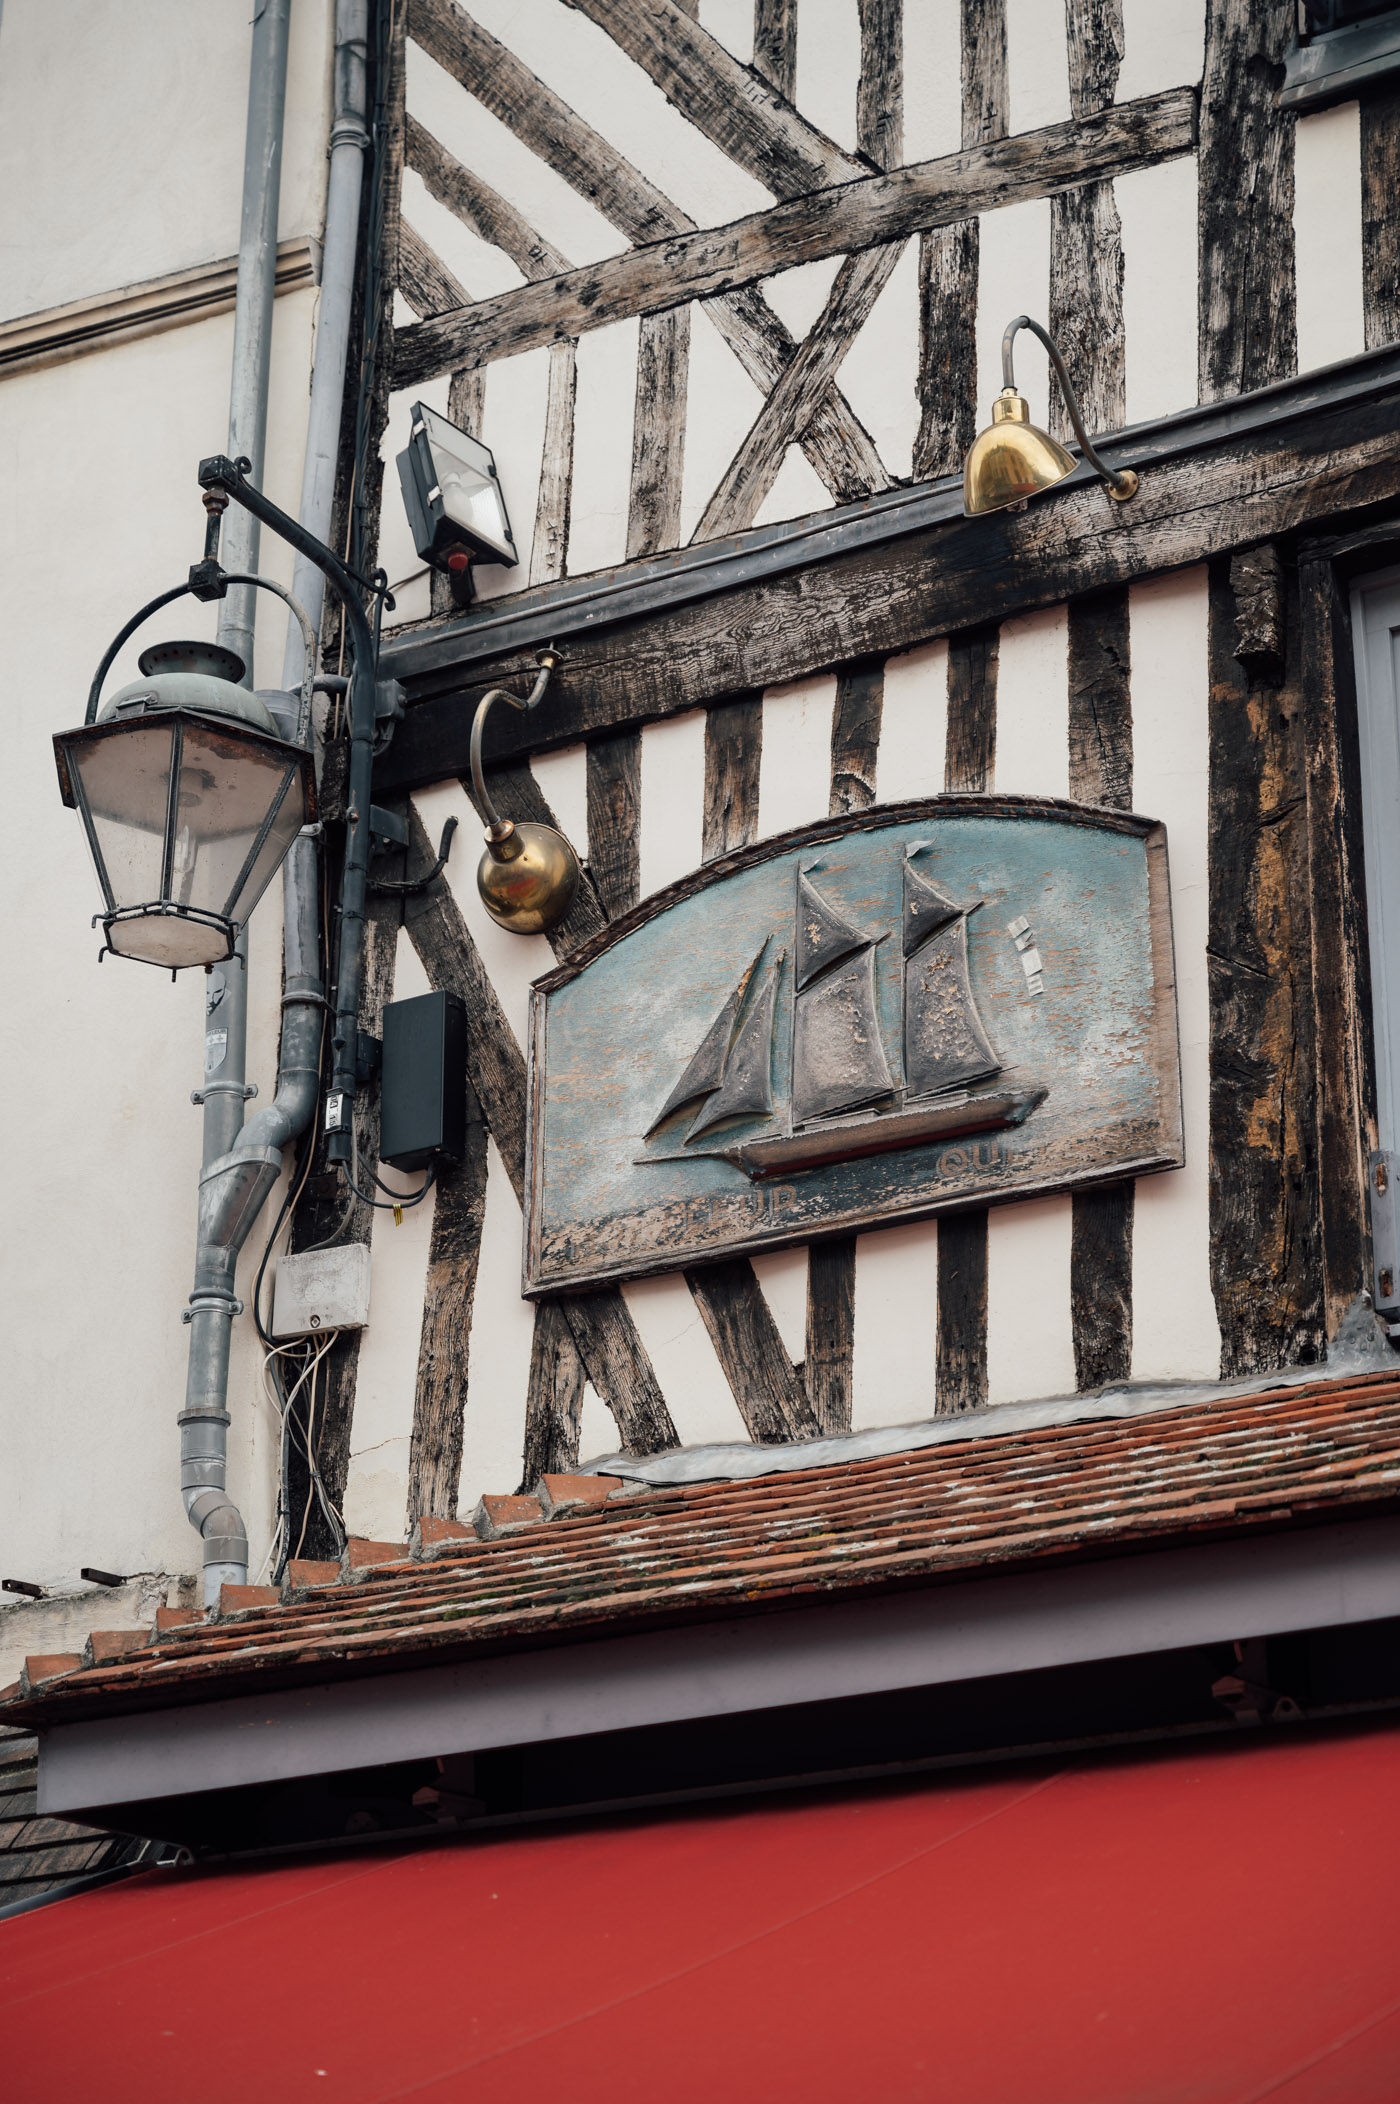 Ship relief at a half-timbered house in Honfleur Normandy